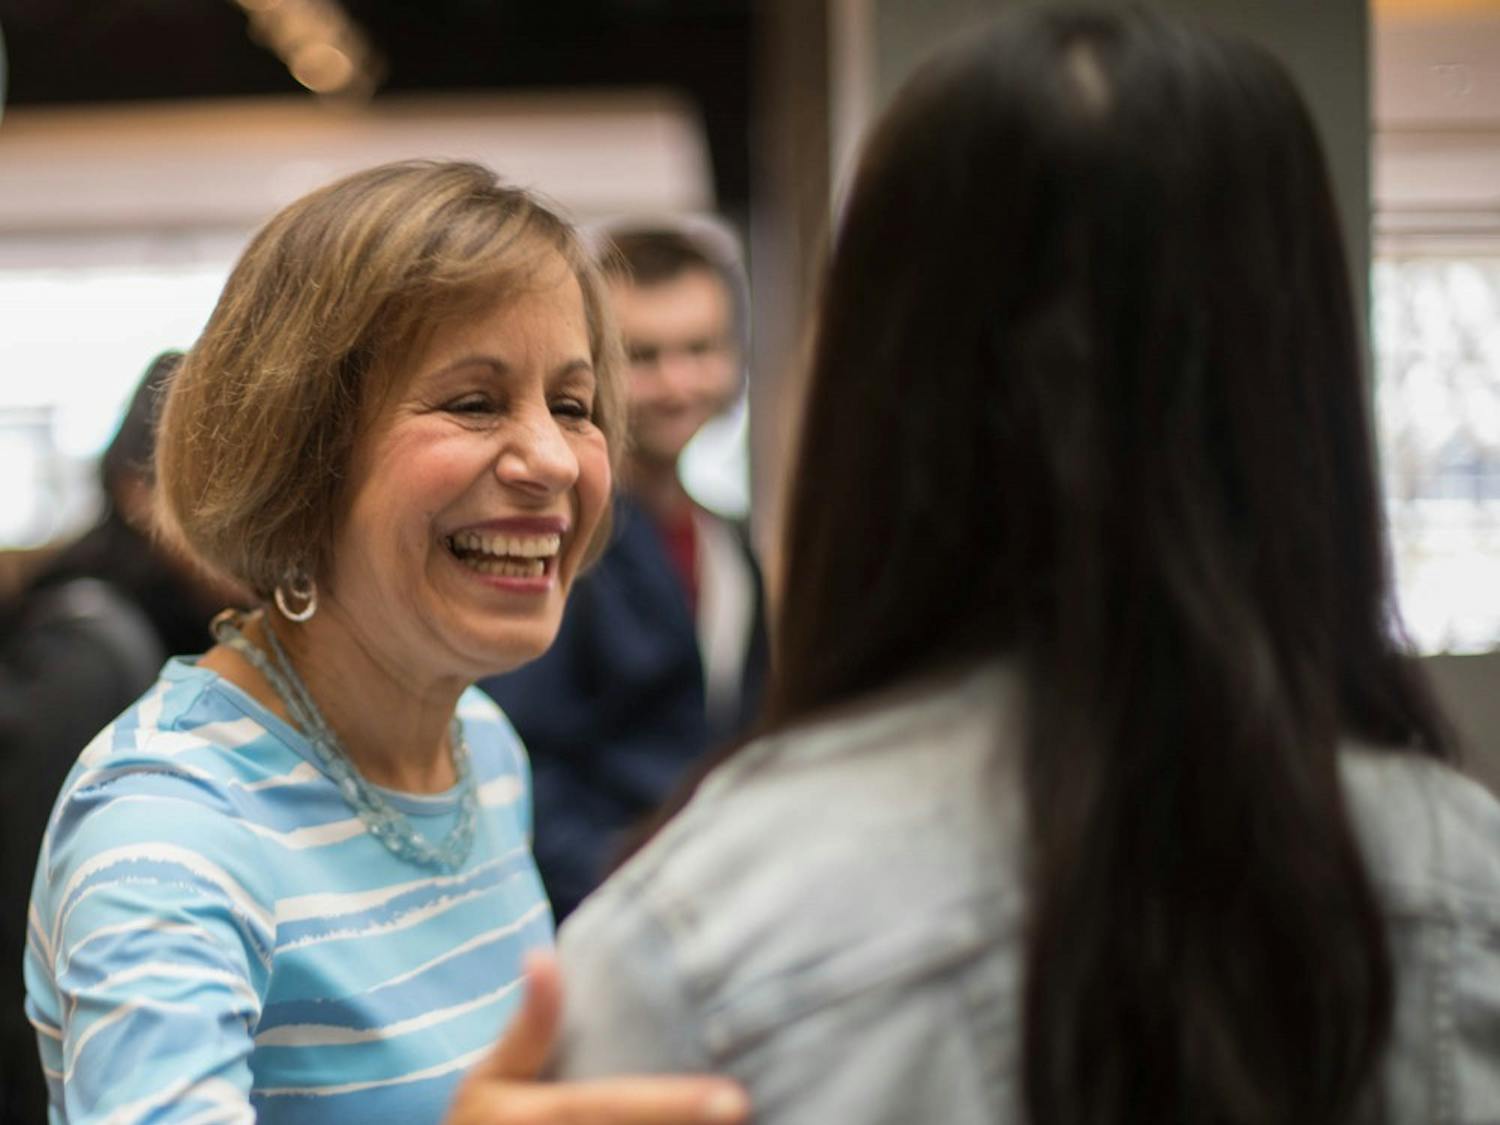 Chancellor Carol Folt hosts "Thank You, Carolina," an opportunity for students to take a selfie with her and get a slice of pizza in the Union on Tuesday, Jan. 29, 2019.